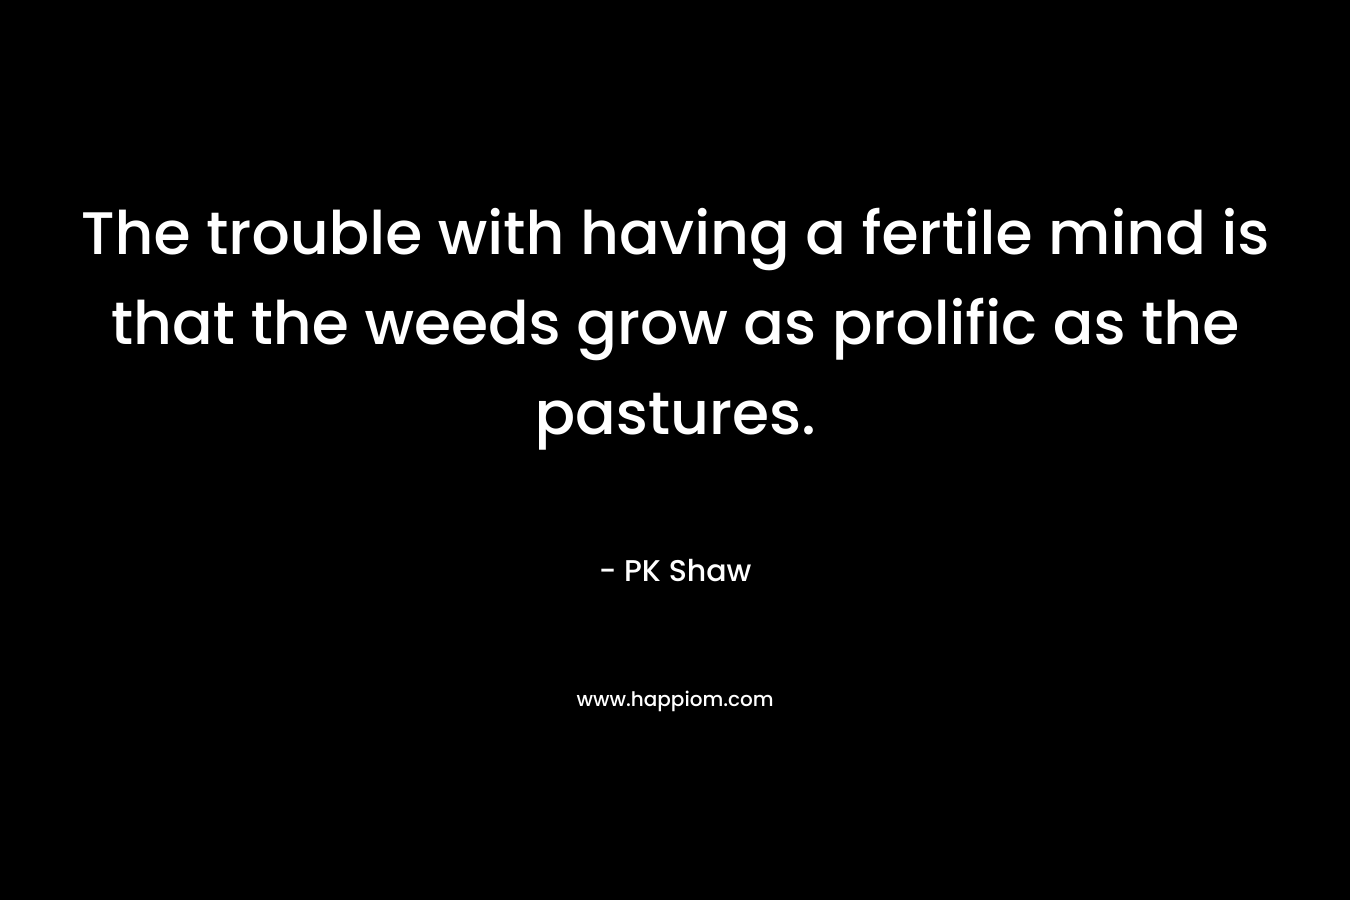 The trouble with having a fertile mind is that the weeds grow as prolific as the pastures.